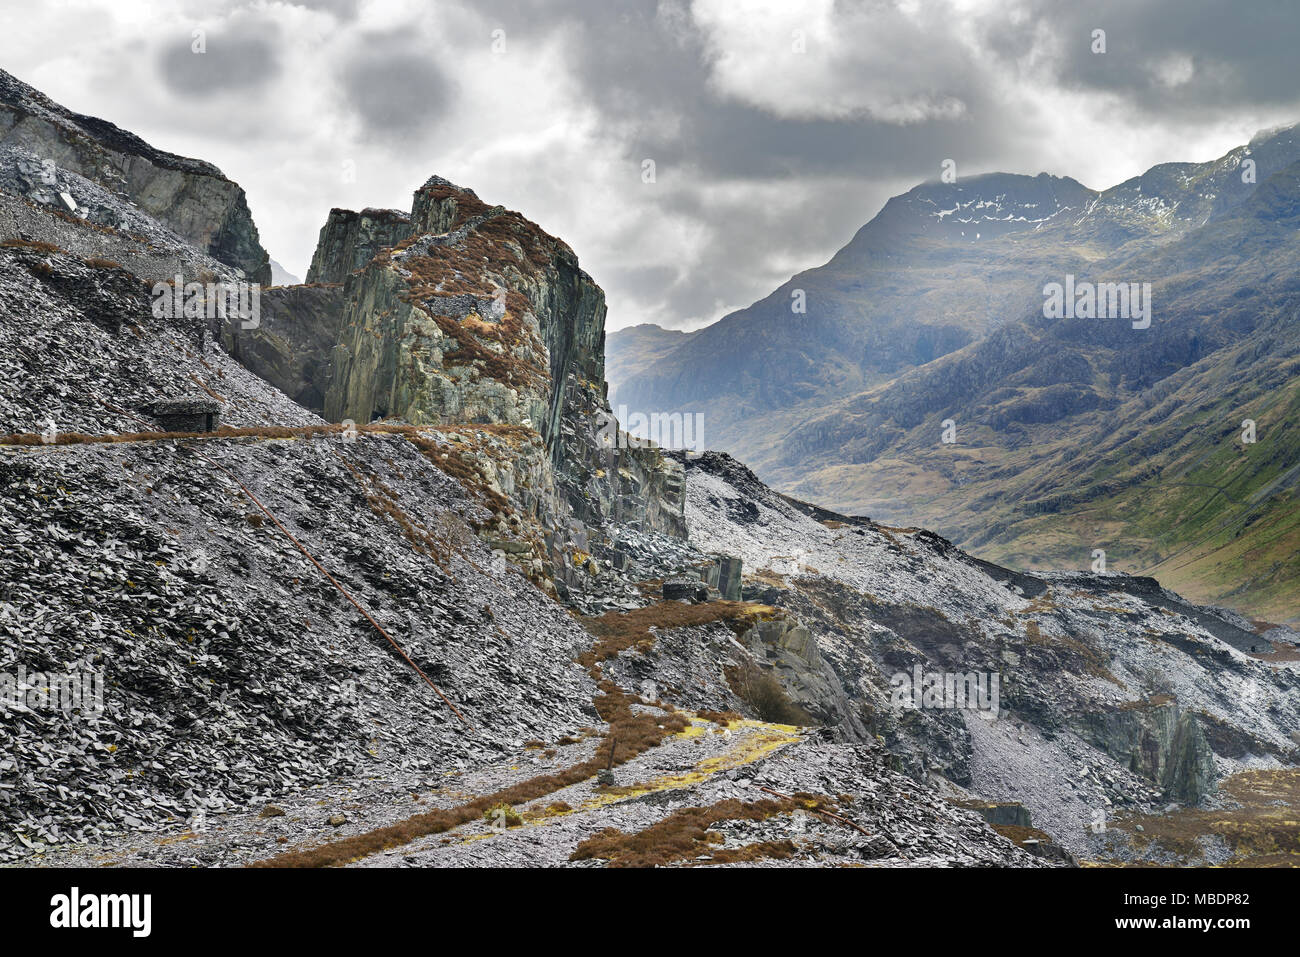 Dinorwic Slate Quarry, located near Llanberis (North Wales), was once the second largest slate quarry in the world. Stock Photo